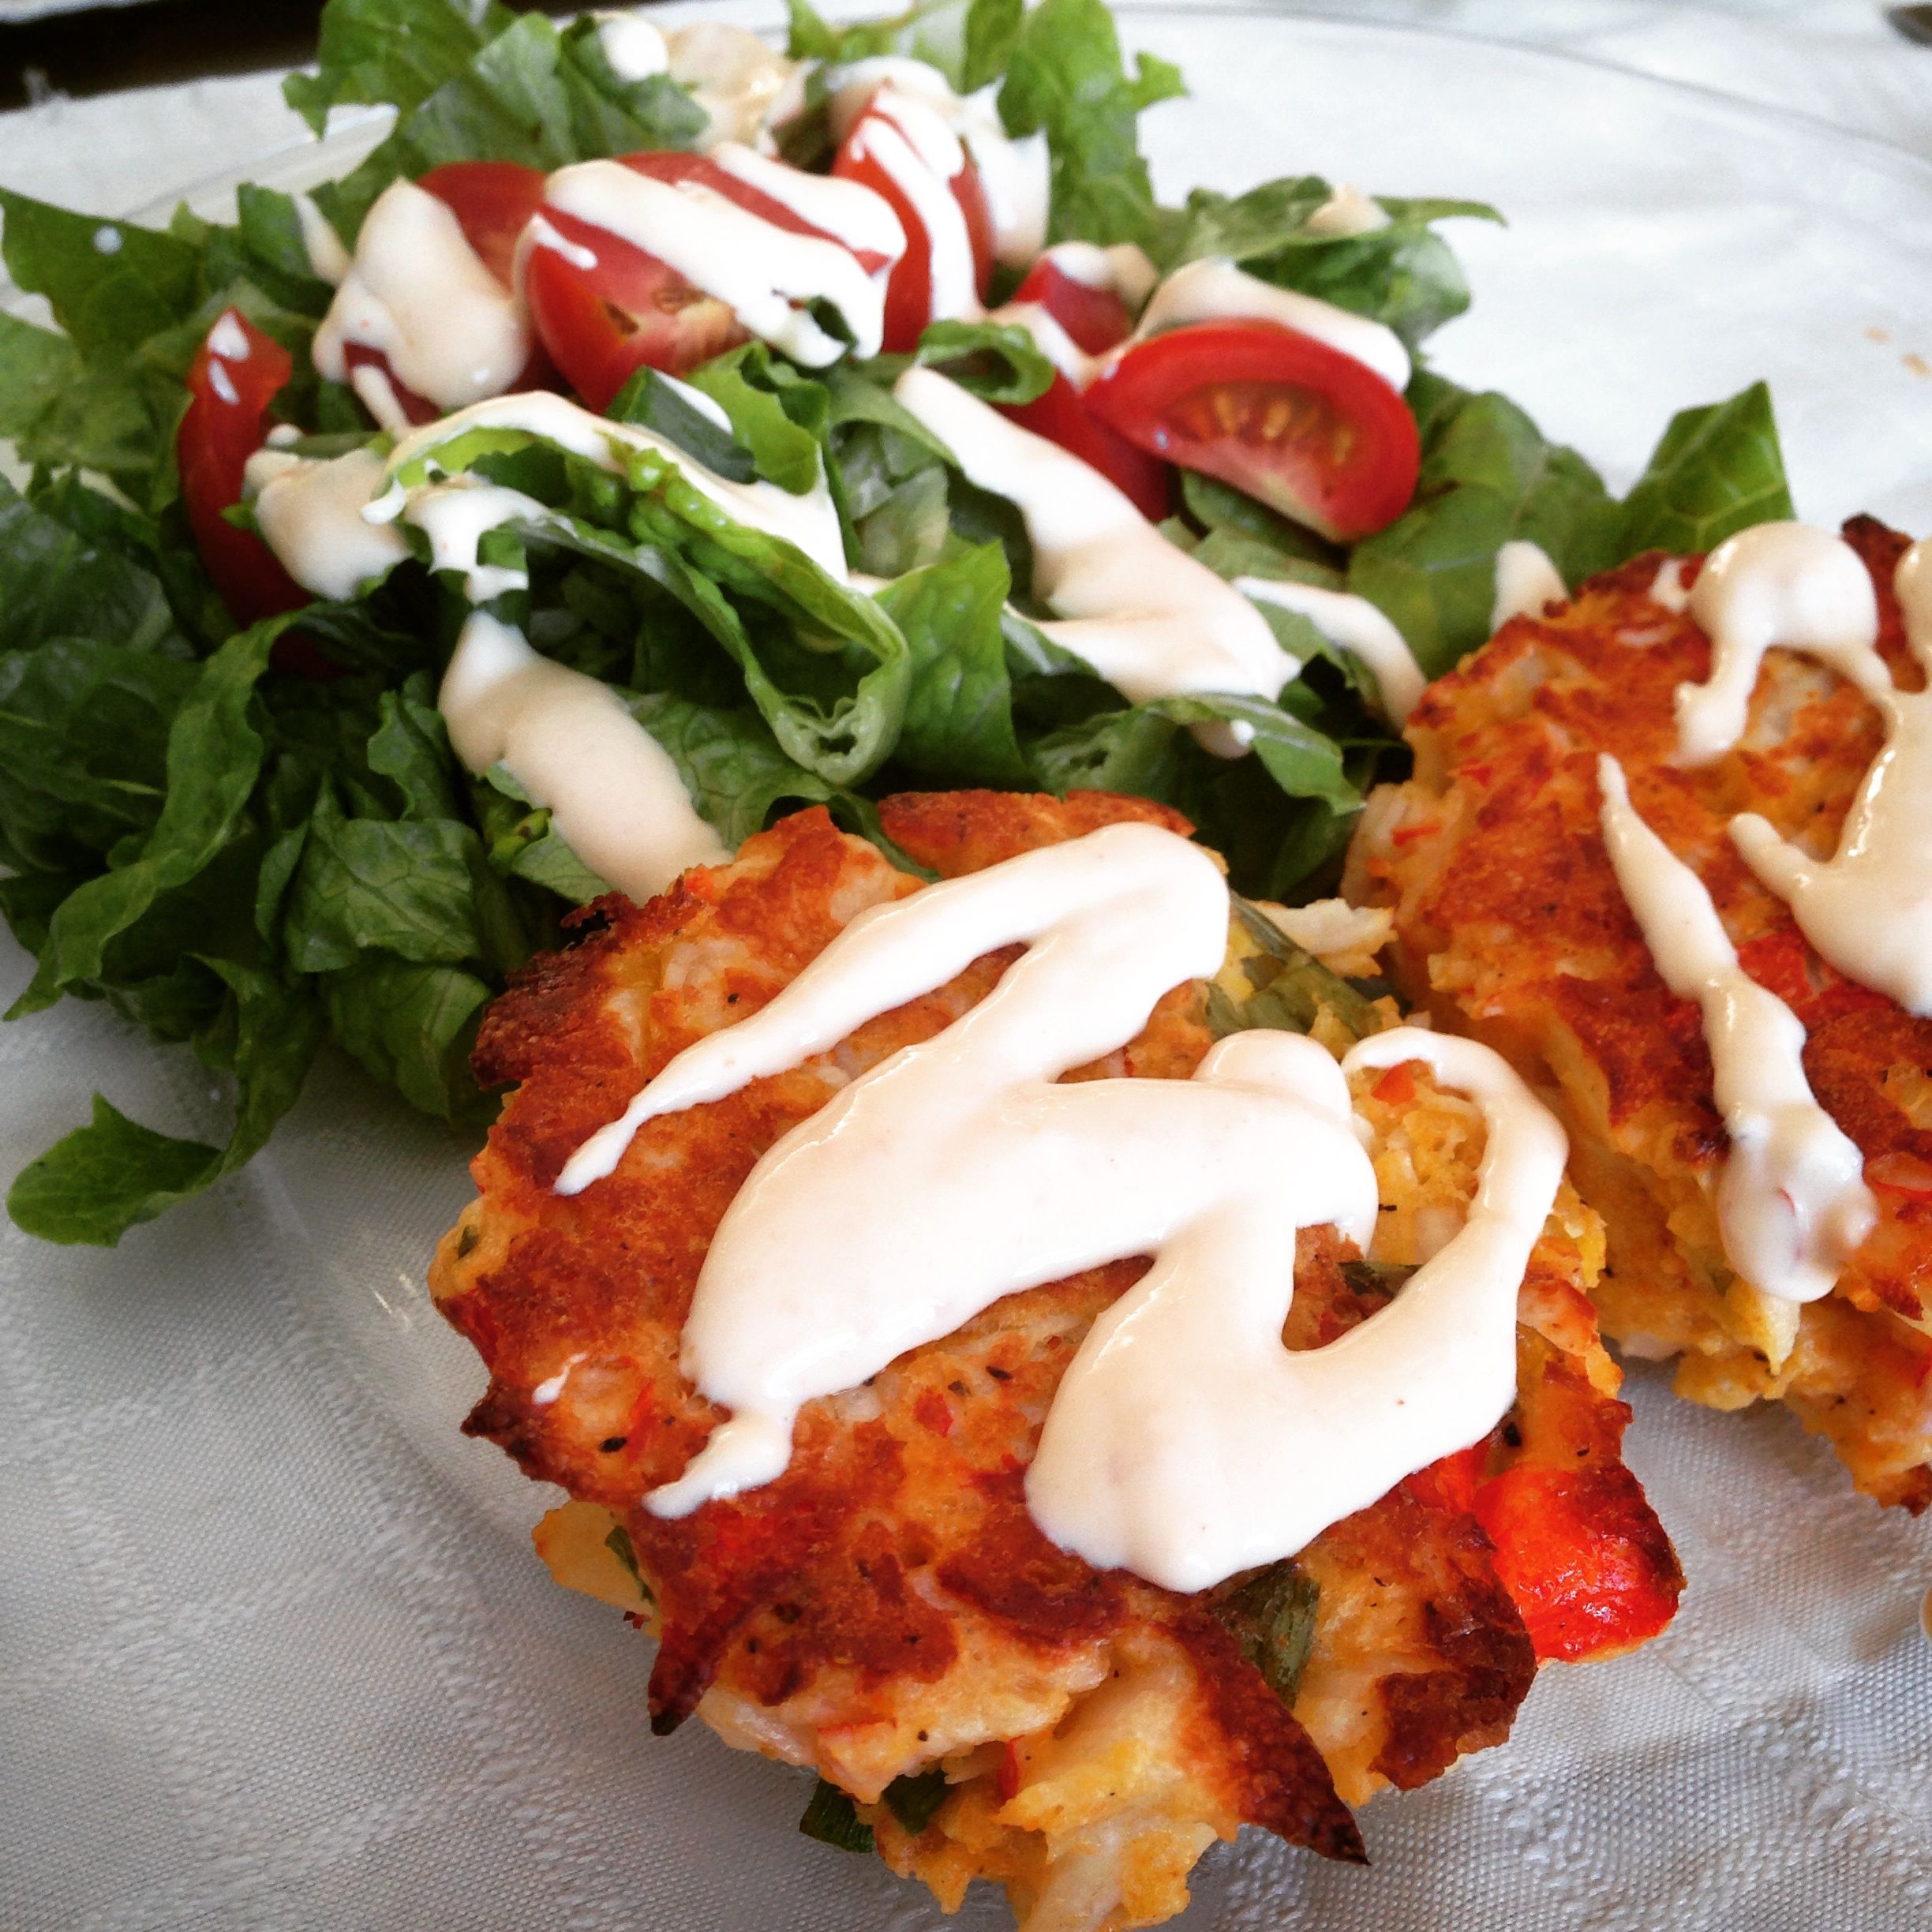 21 Day Fix approved skinny baked crab cakes — with #21DayFix count